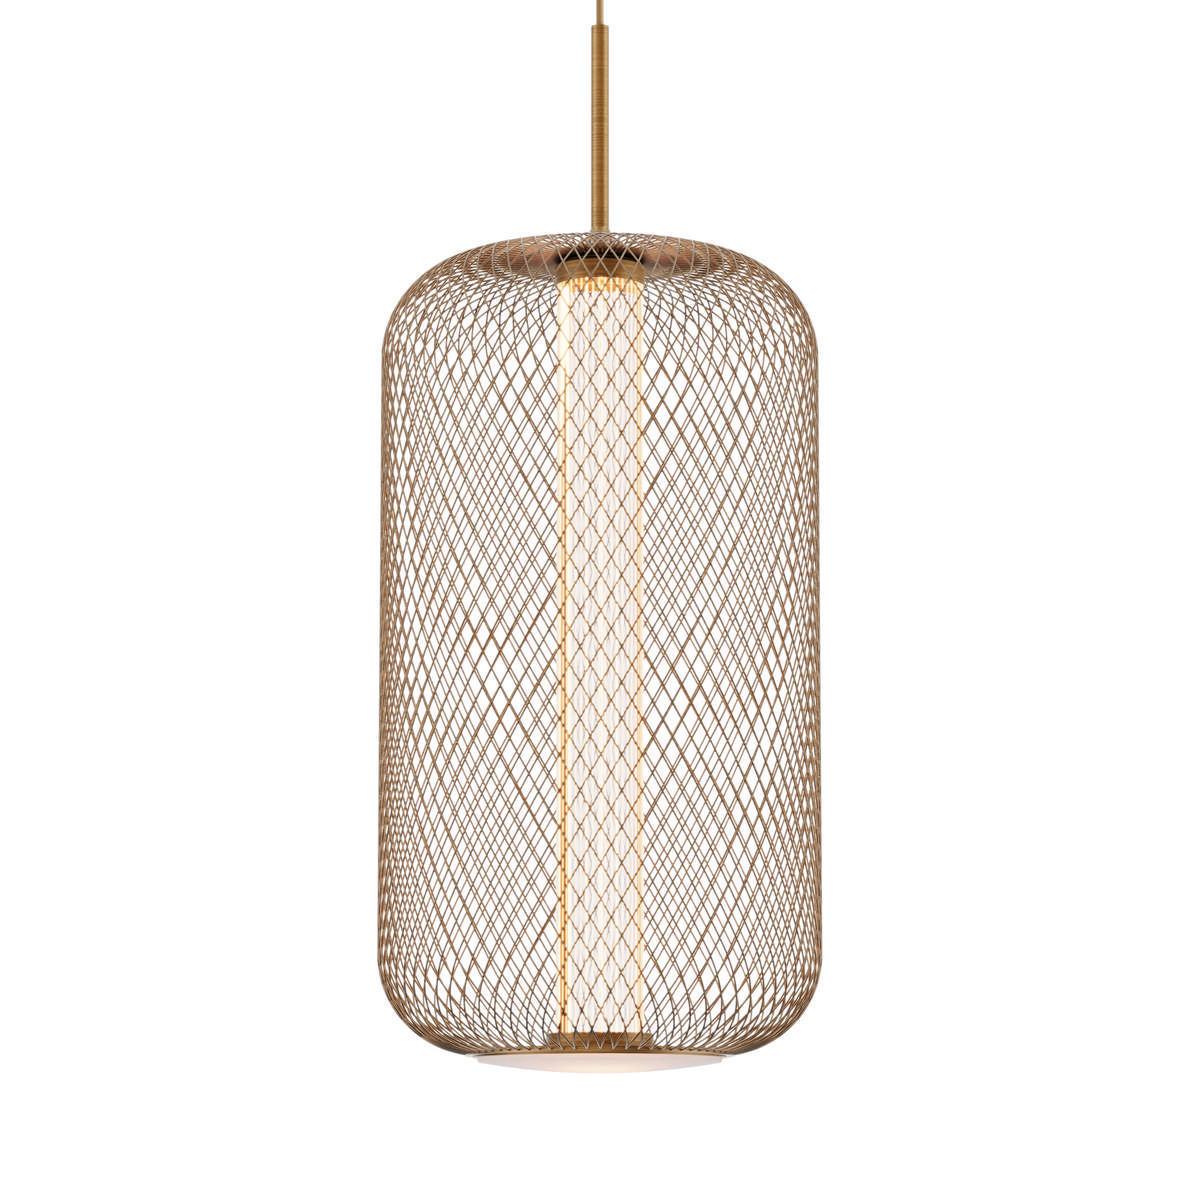 By Eve Eve Garza Tube Hanglamp Collectie 1